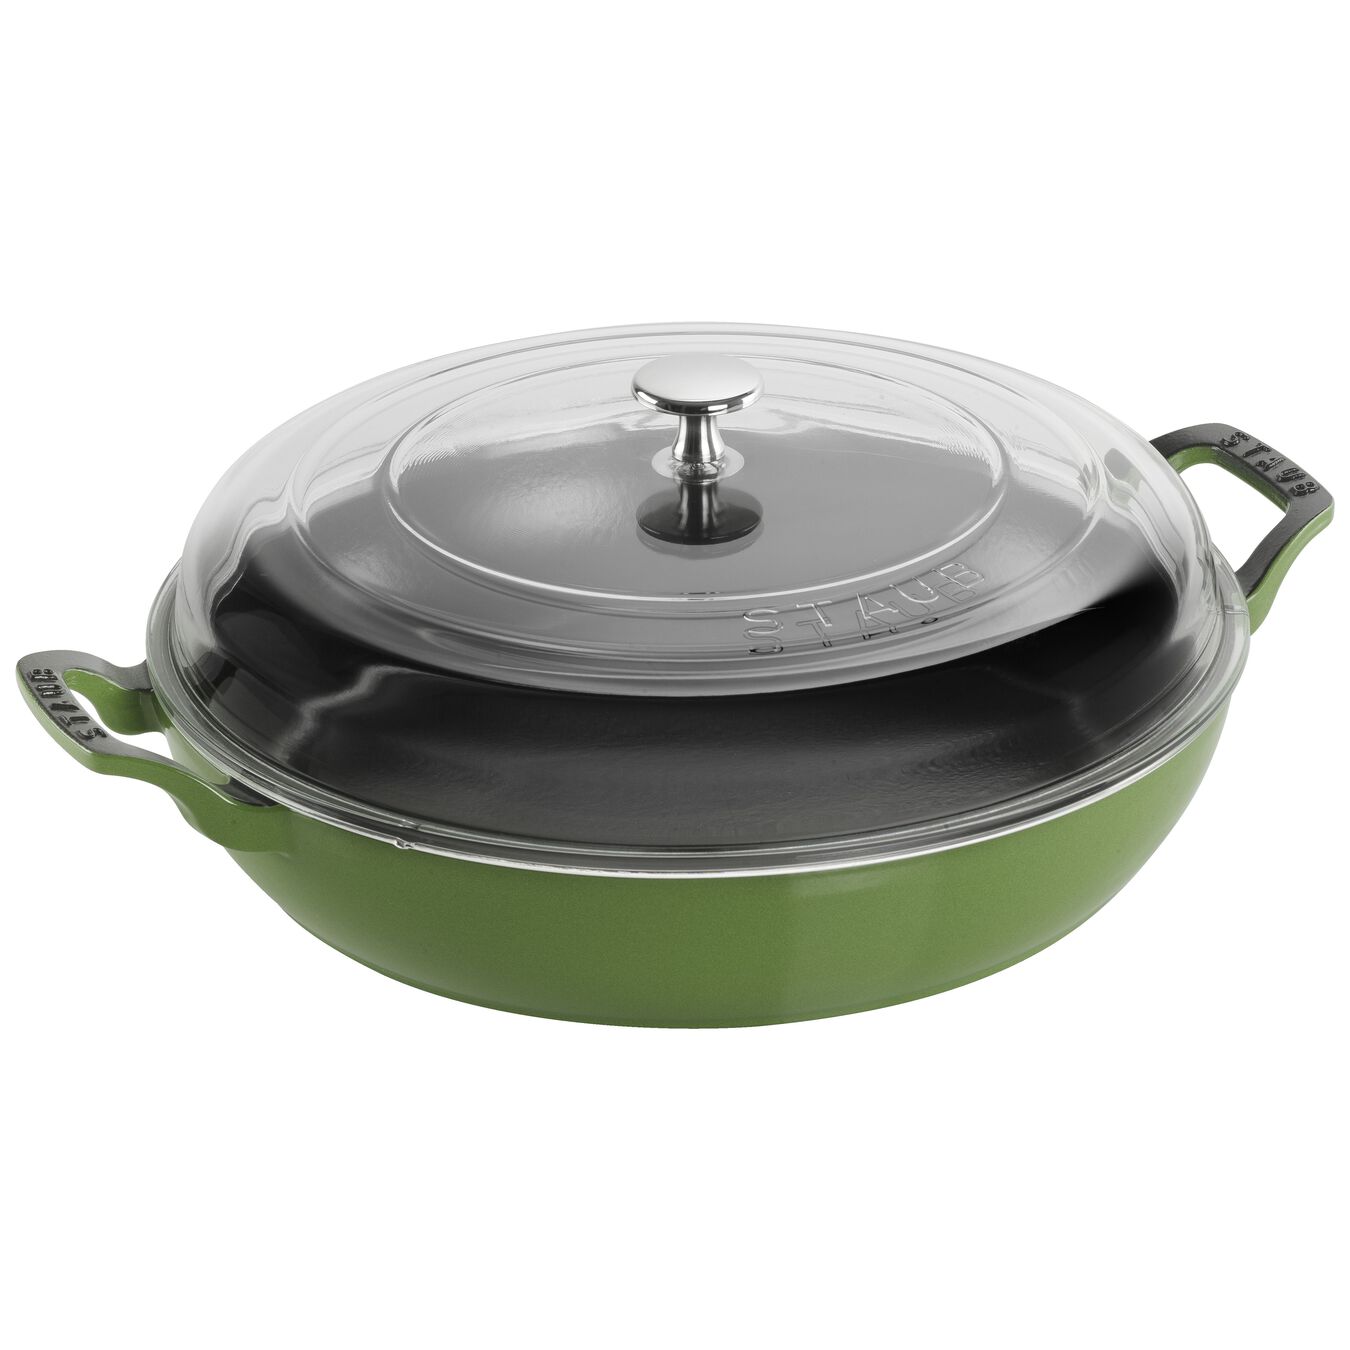 3.25 l cast iron round Saute pan with glass lid, lime-green - Visual Imperfections,,large 1